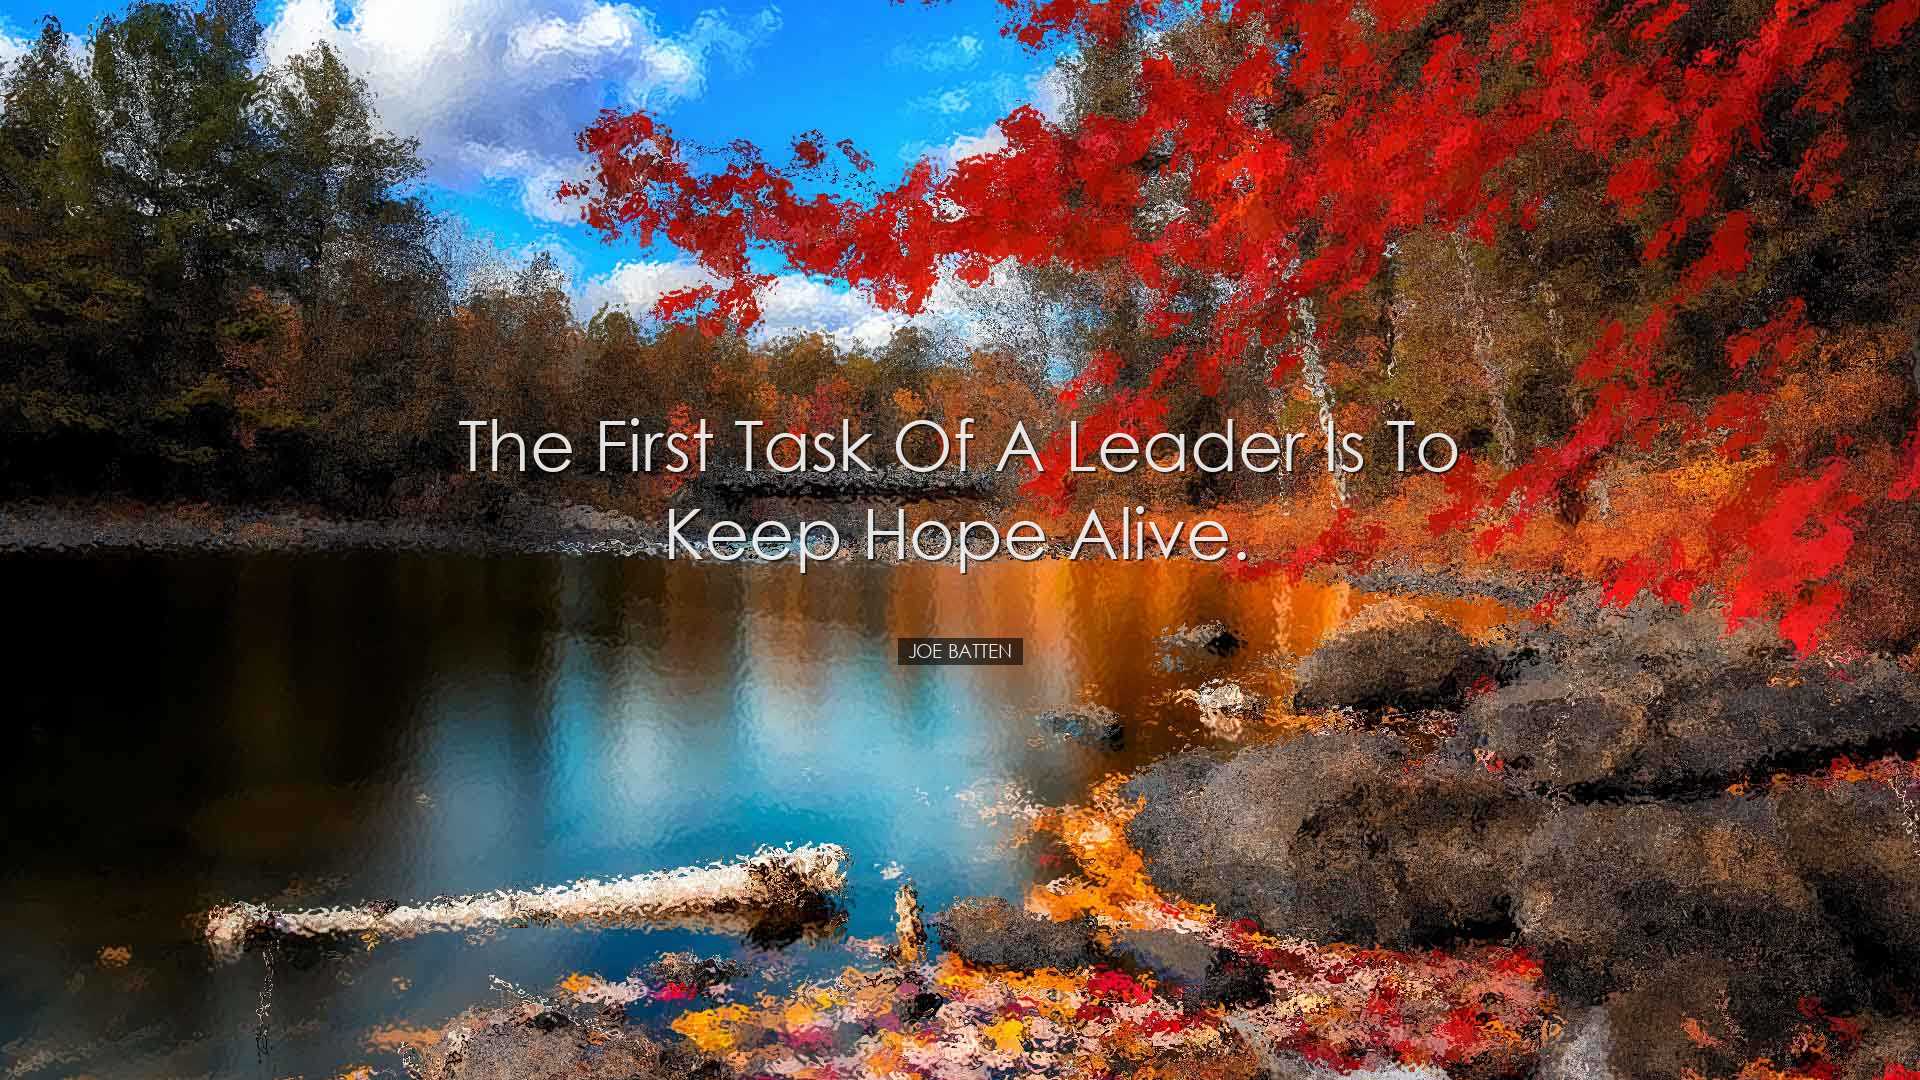 The first task of a leader is to keep hope alive. - Joe Batten